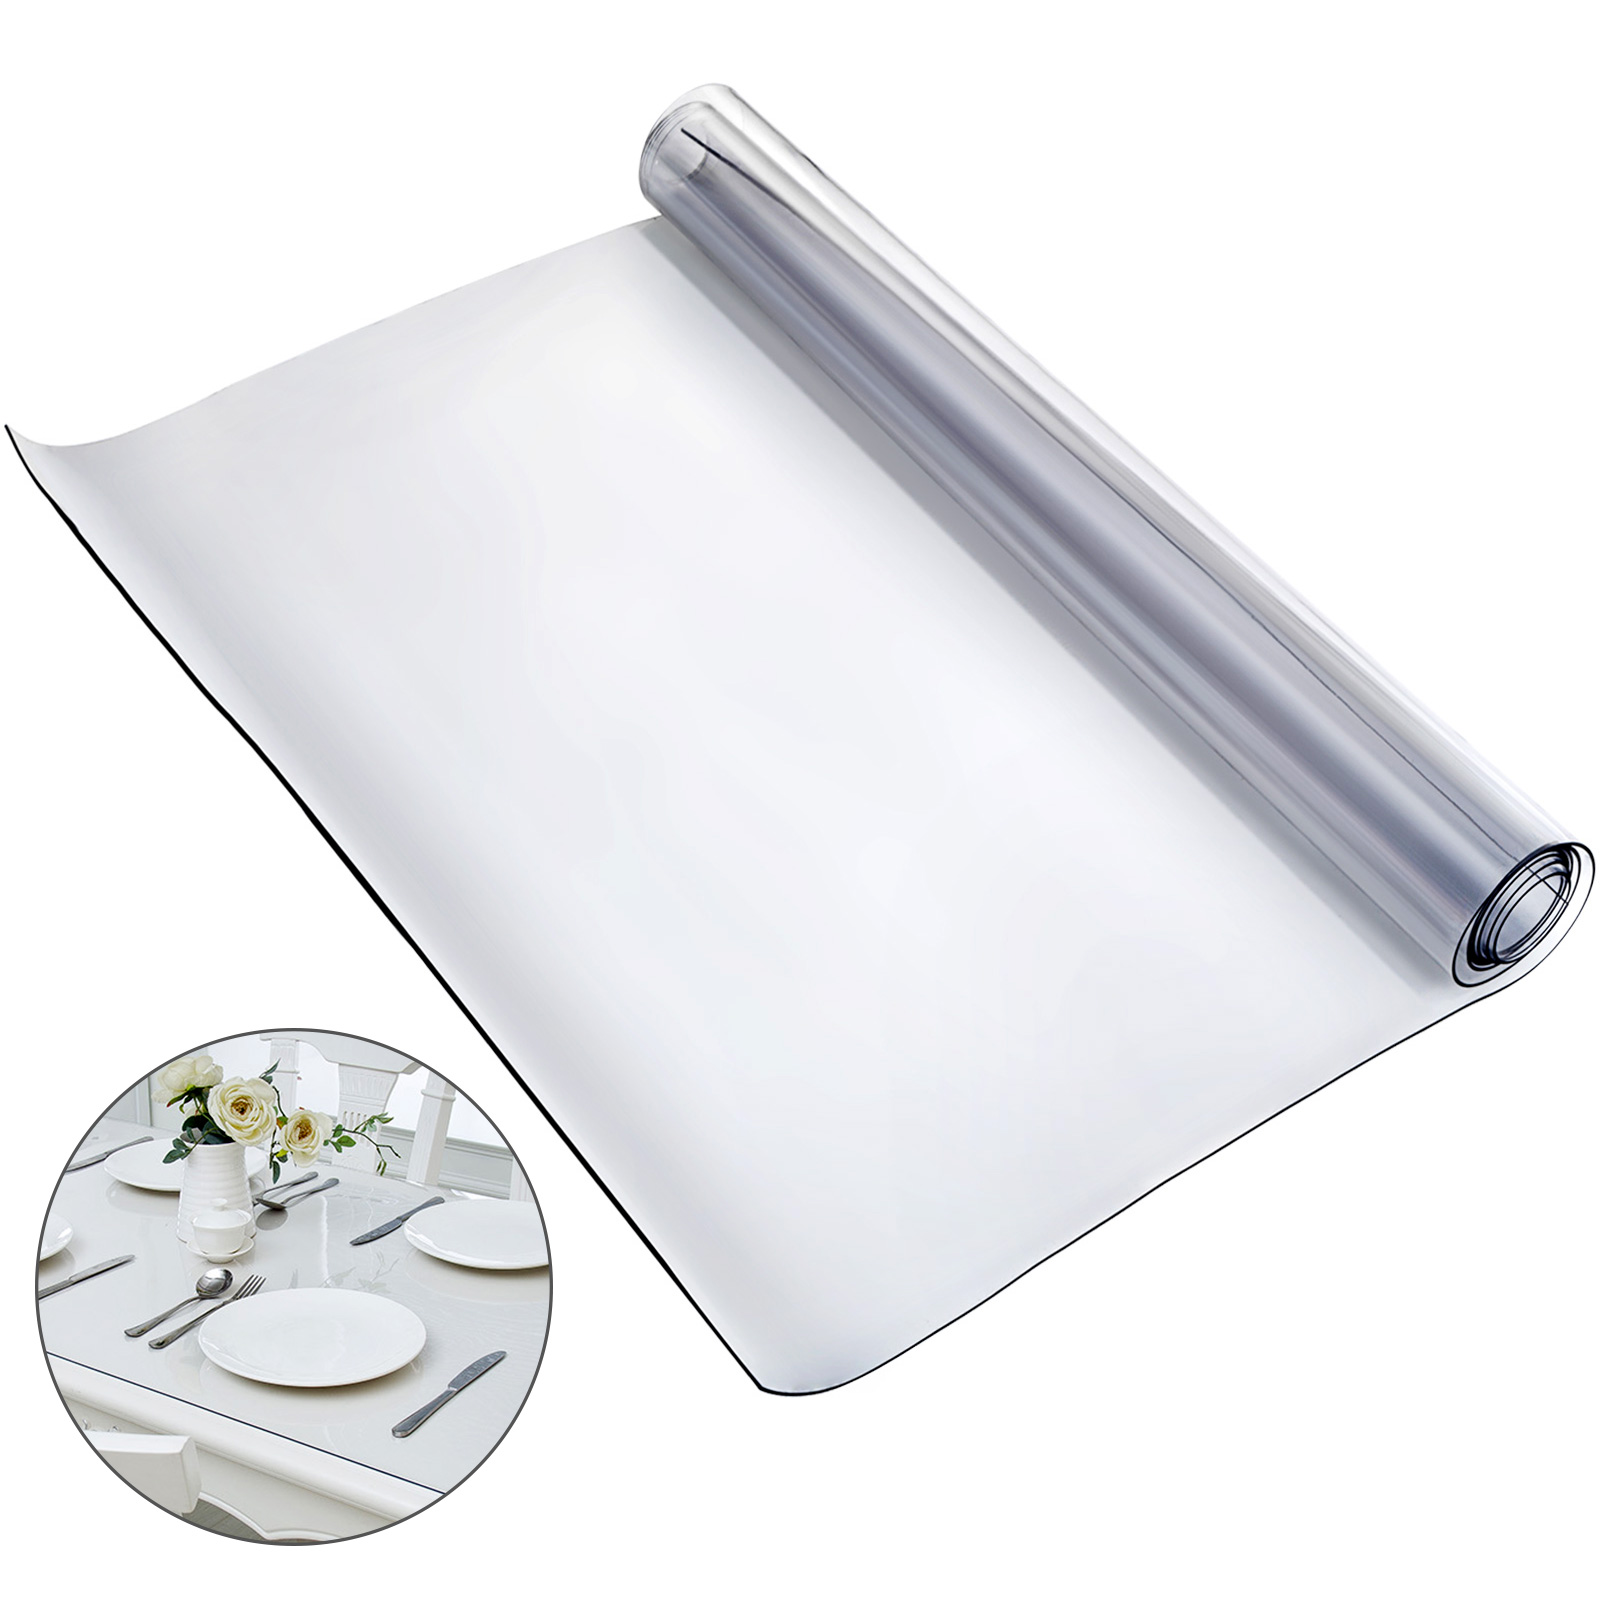 Waterproof PVC Clear Tablecloth Transparent Table Cover Mat Protector 47" x 28" 